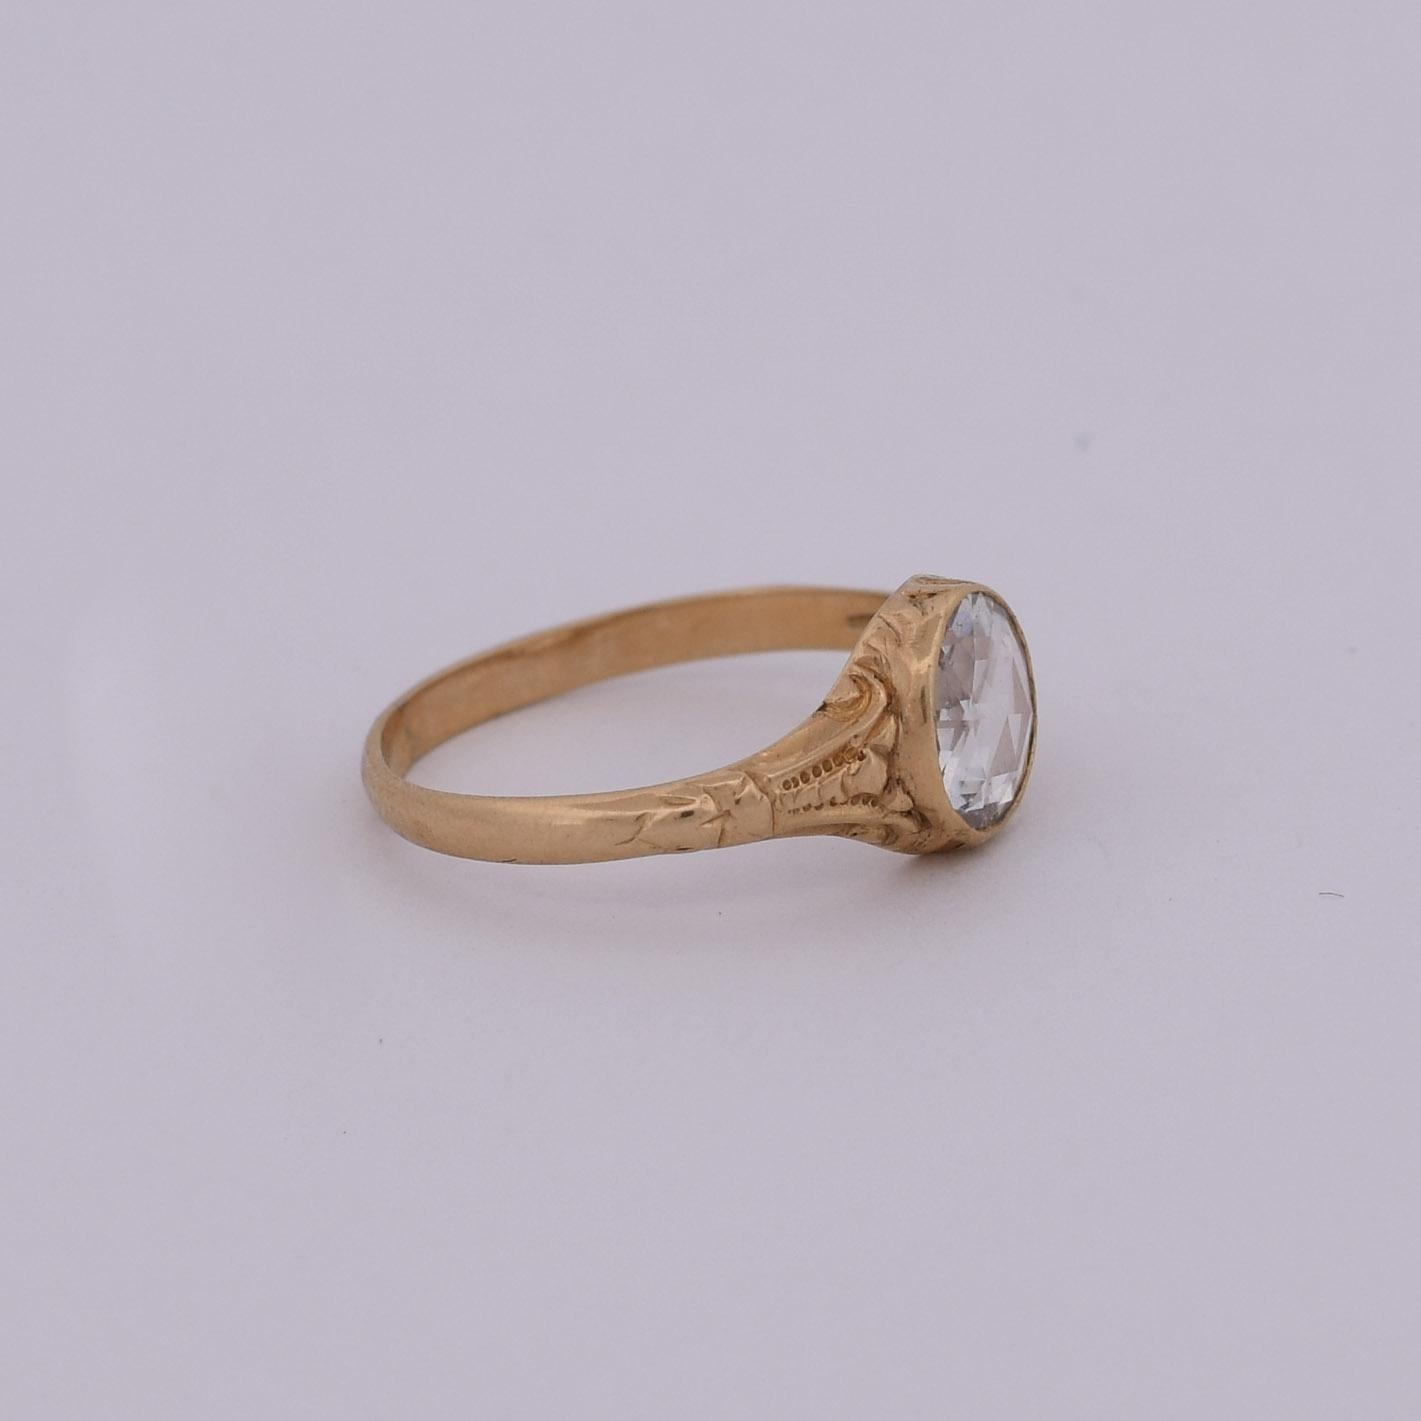 1900's Victorian 18K Gold Rose Cut Diamond Low Profile Filigree Carved Solitaire In Good Condition For Sale In Addison, TX